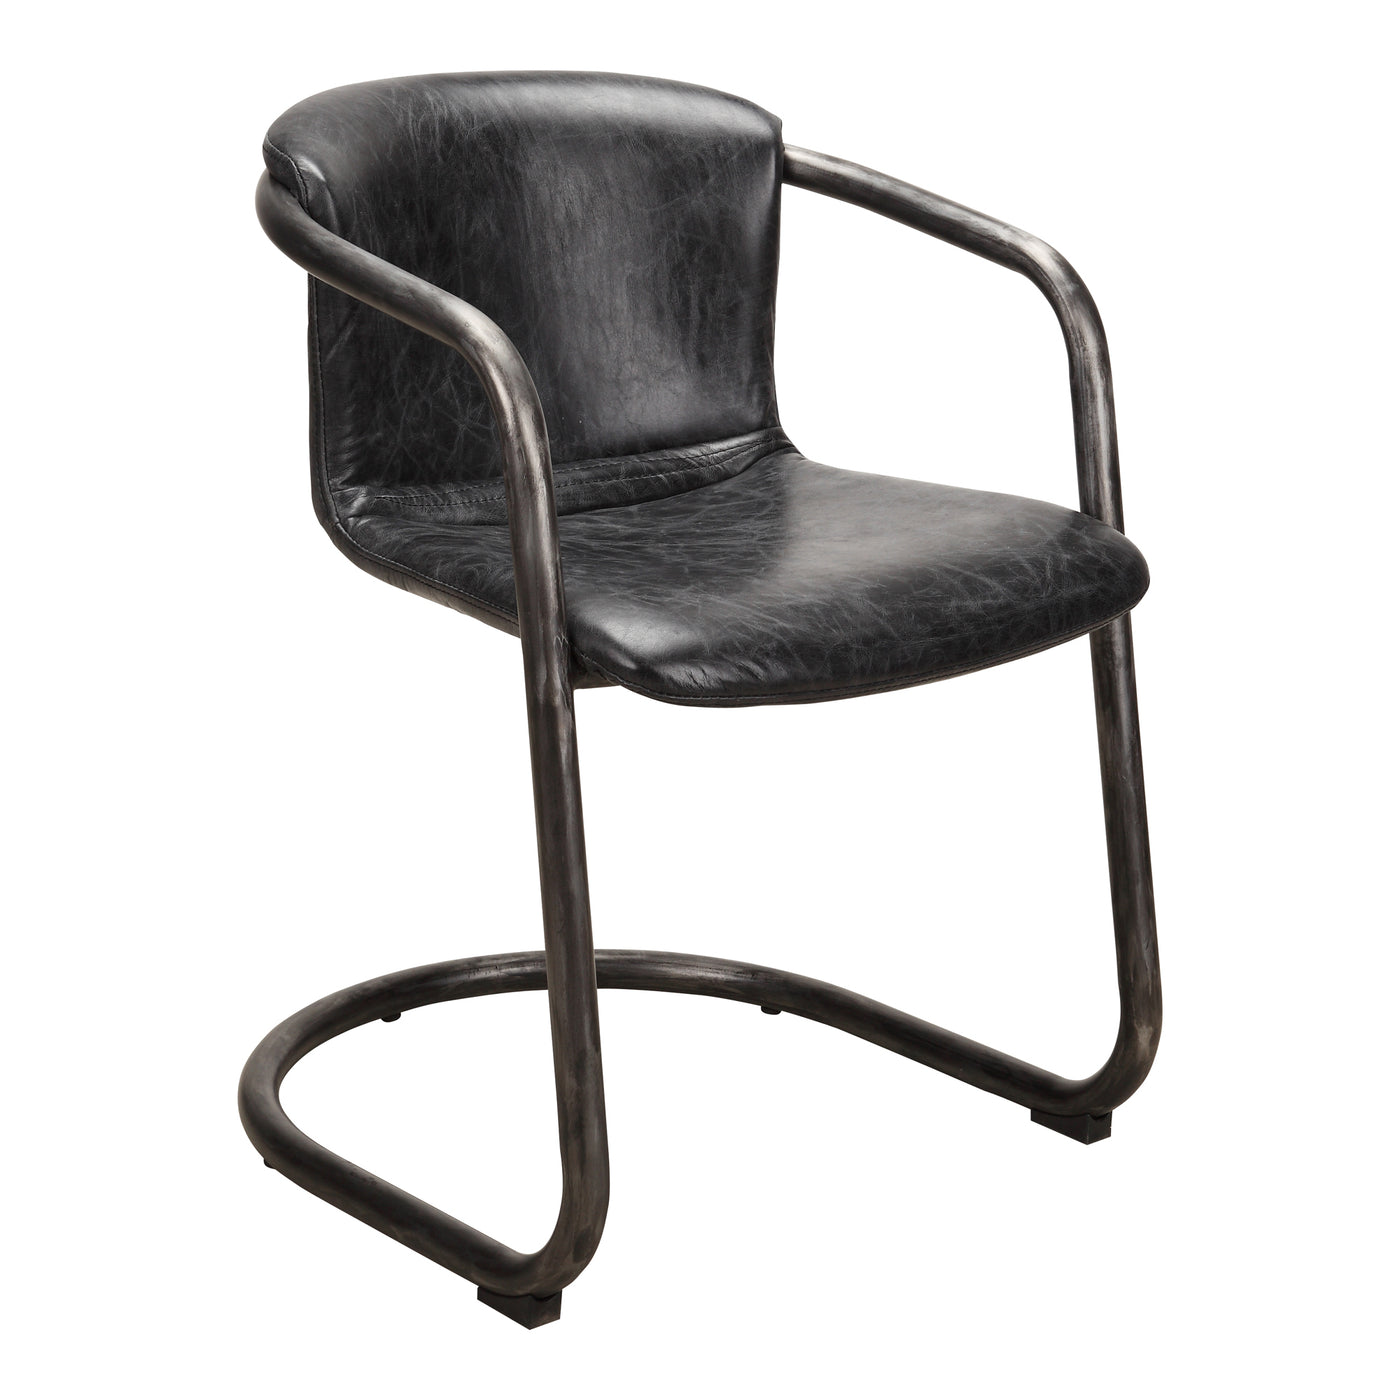 Add the Freeman Dining Chair to create some originality in your design. It has a modern industrial look with a rustic blac...